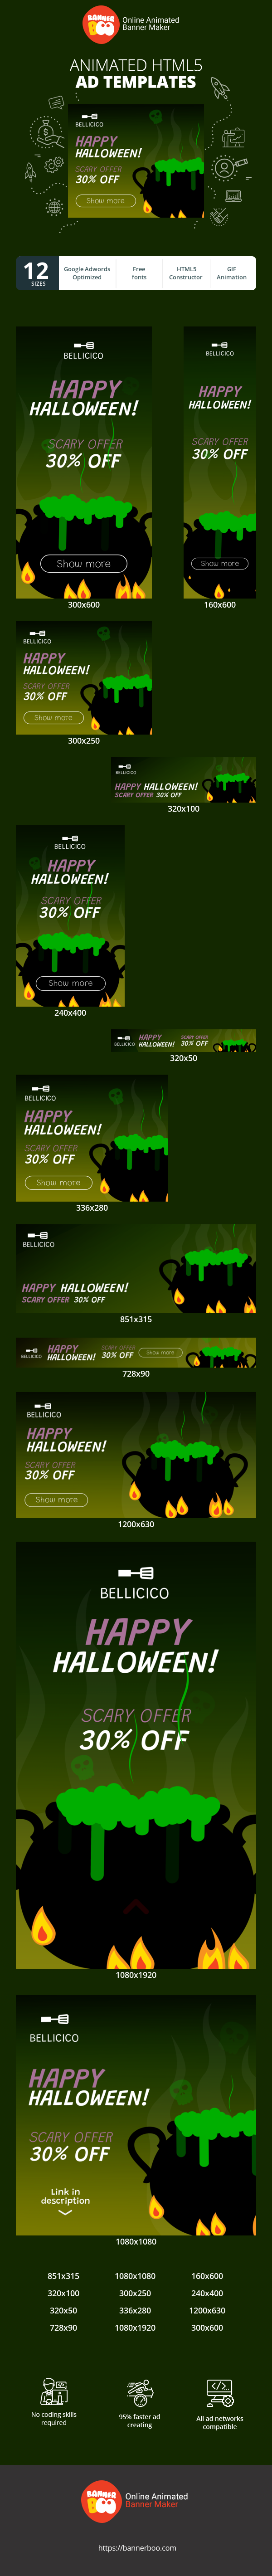 Banner ad template — Happy Halloween — Scary Offer 30% Off